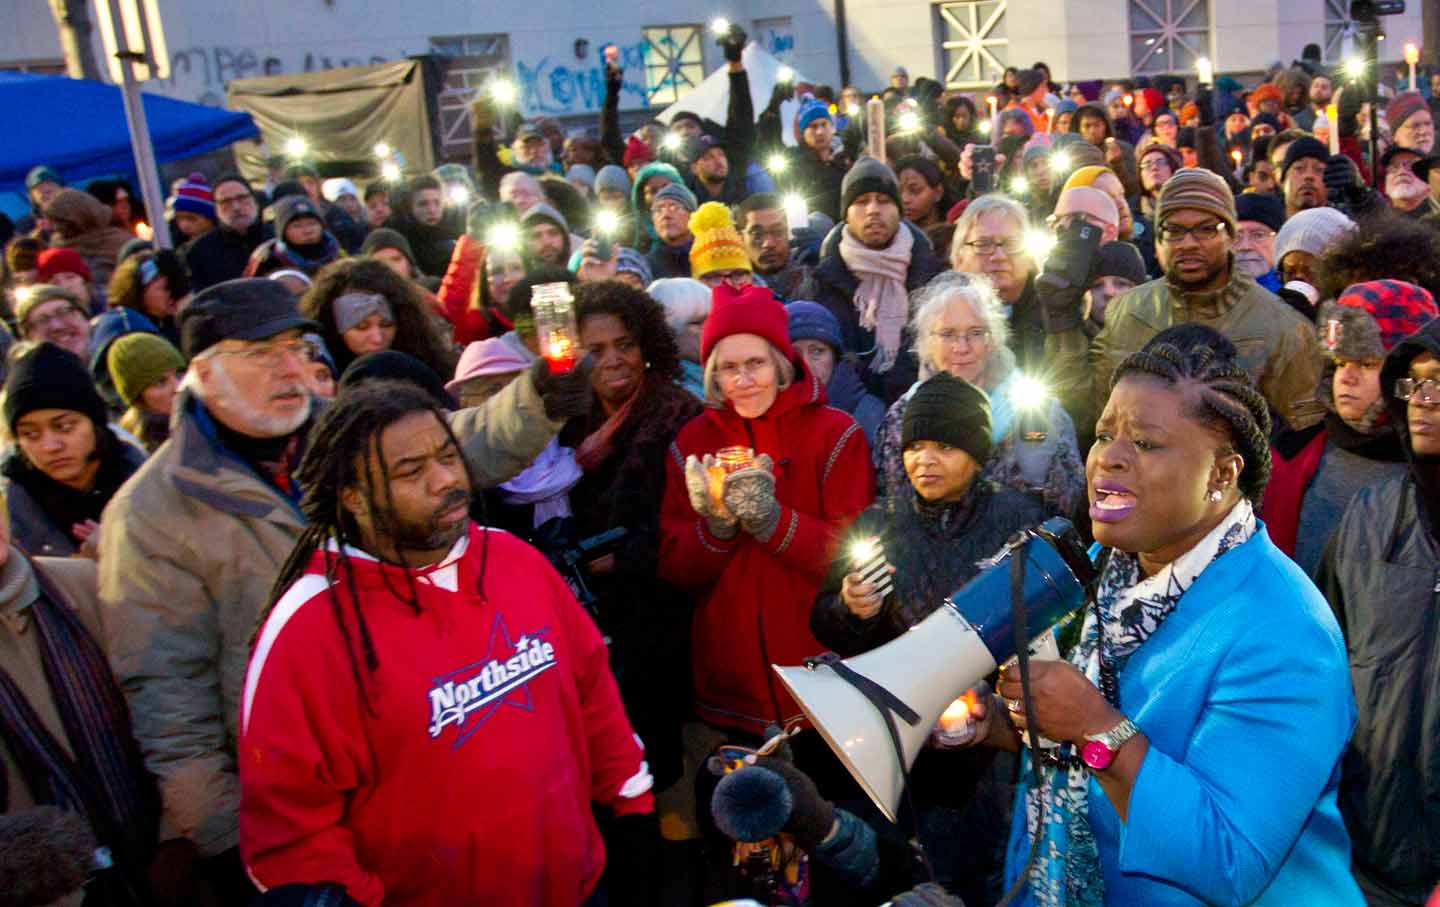 NAACP Minneapolis President Nekima Levy-Pounds speaks during a vigil in front of the Minneapolis Police Department's fourth precinct in Minneapolis.